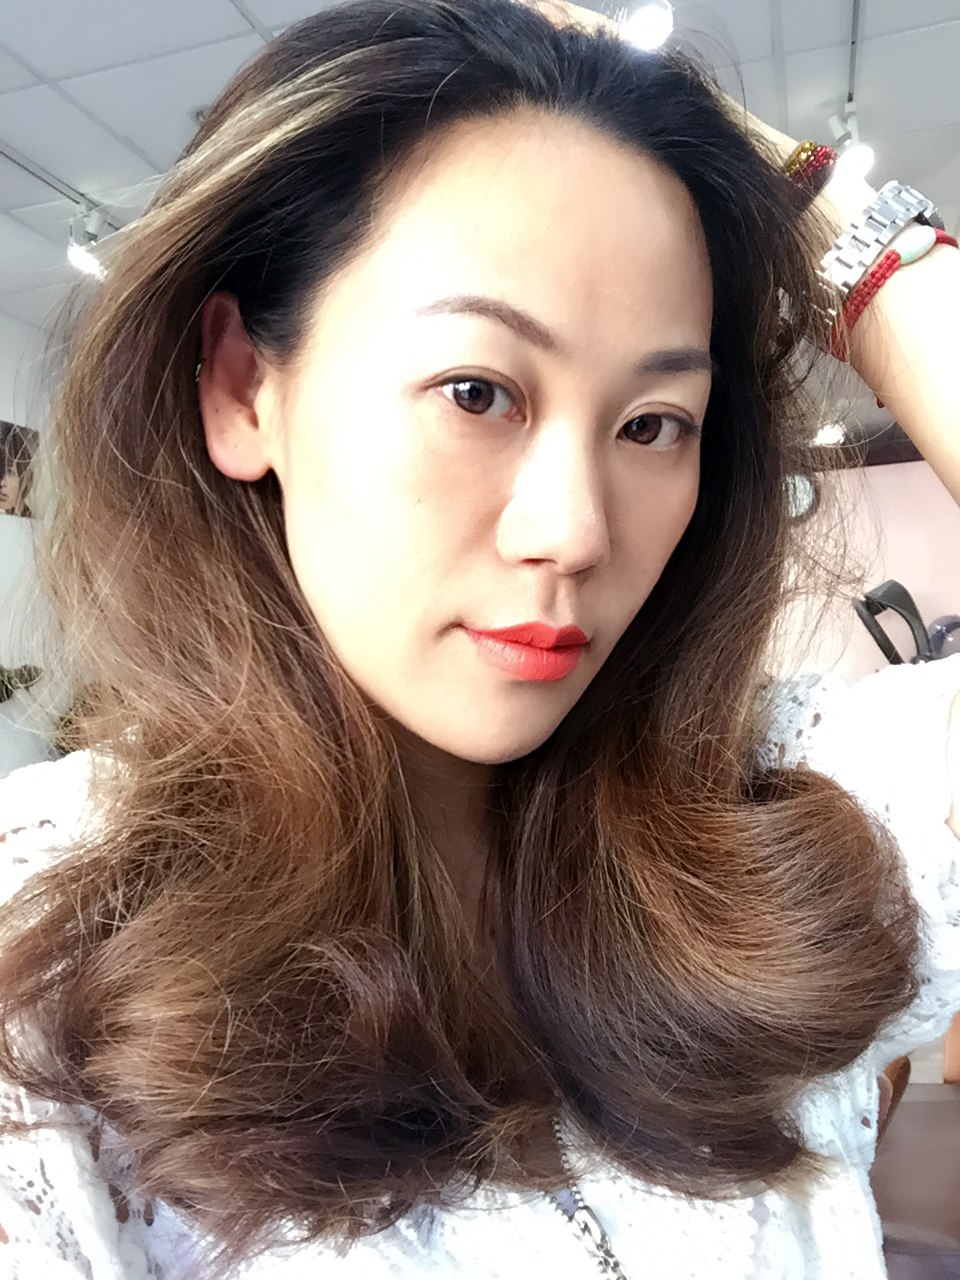 Wenzhoufamous Hair Salon 3910 64th St, Woodside New York 11377